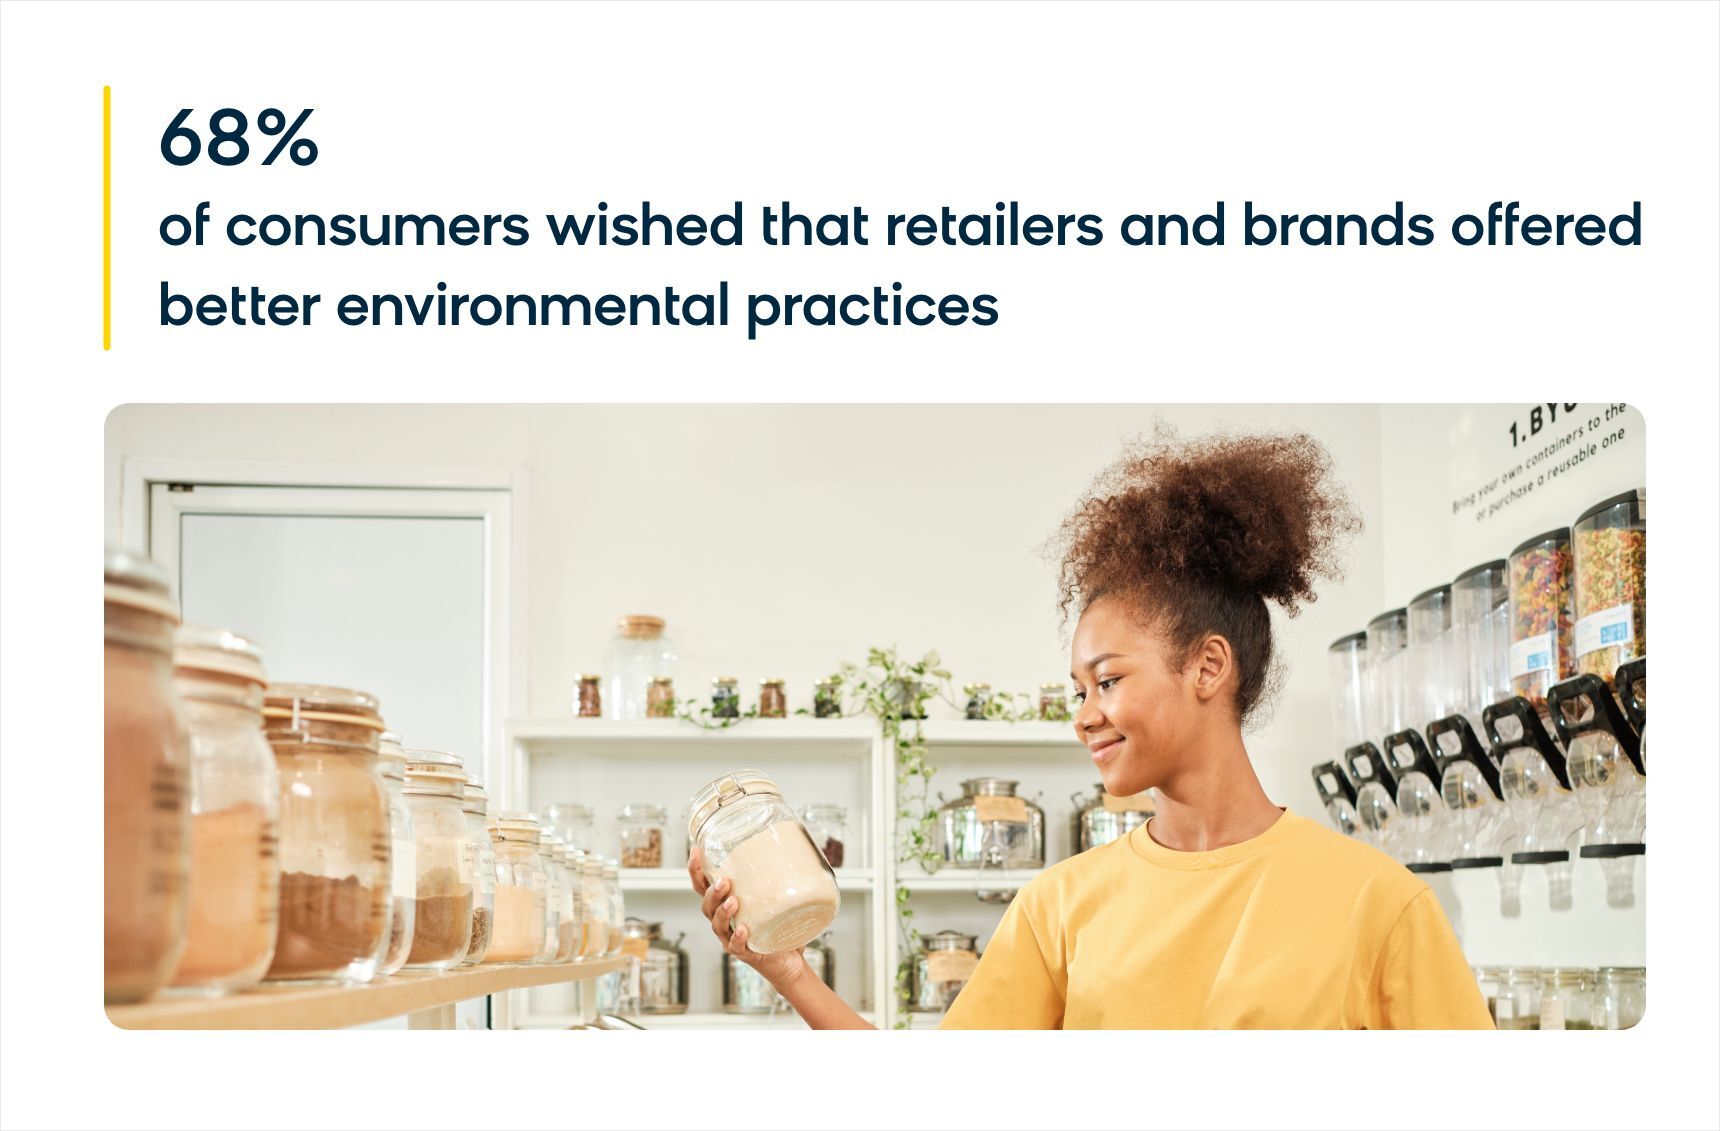 68% of consumers wished that retailers and brands offered better environmental practices